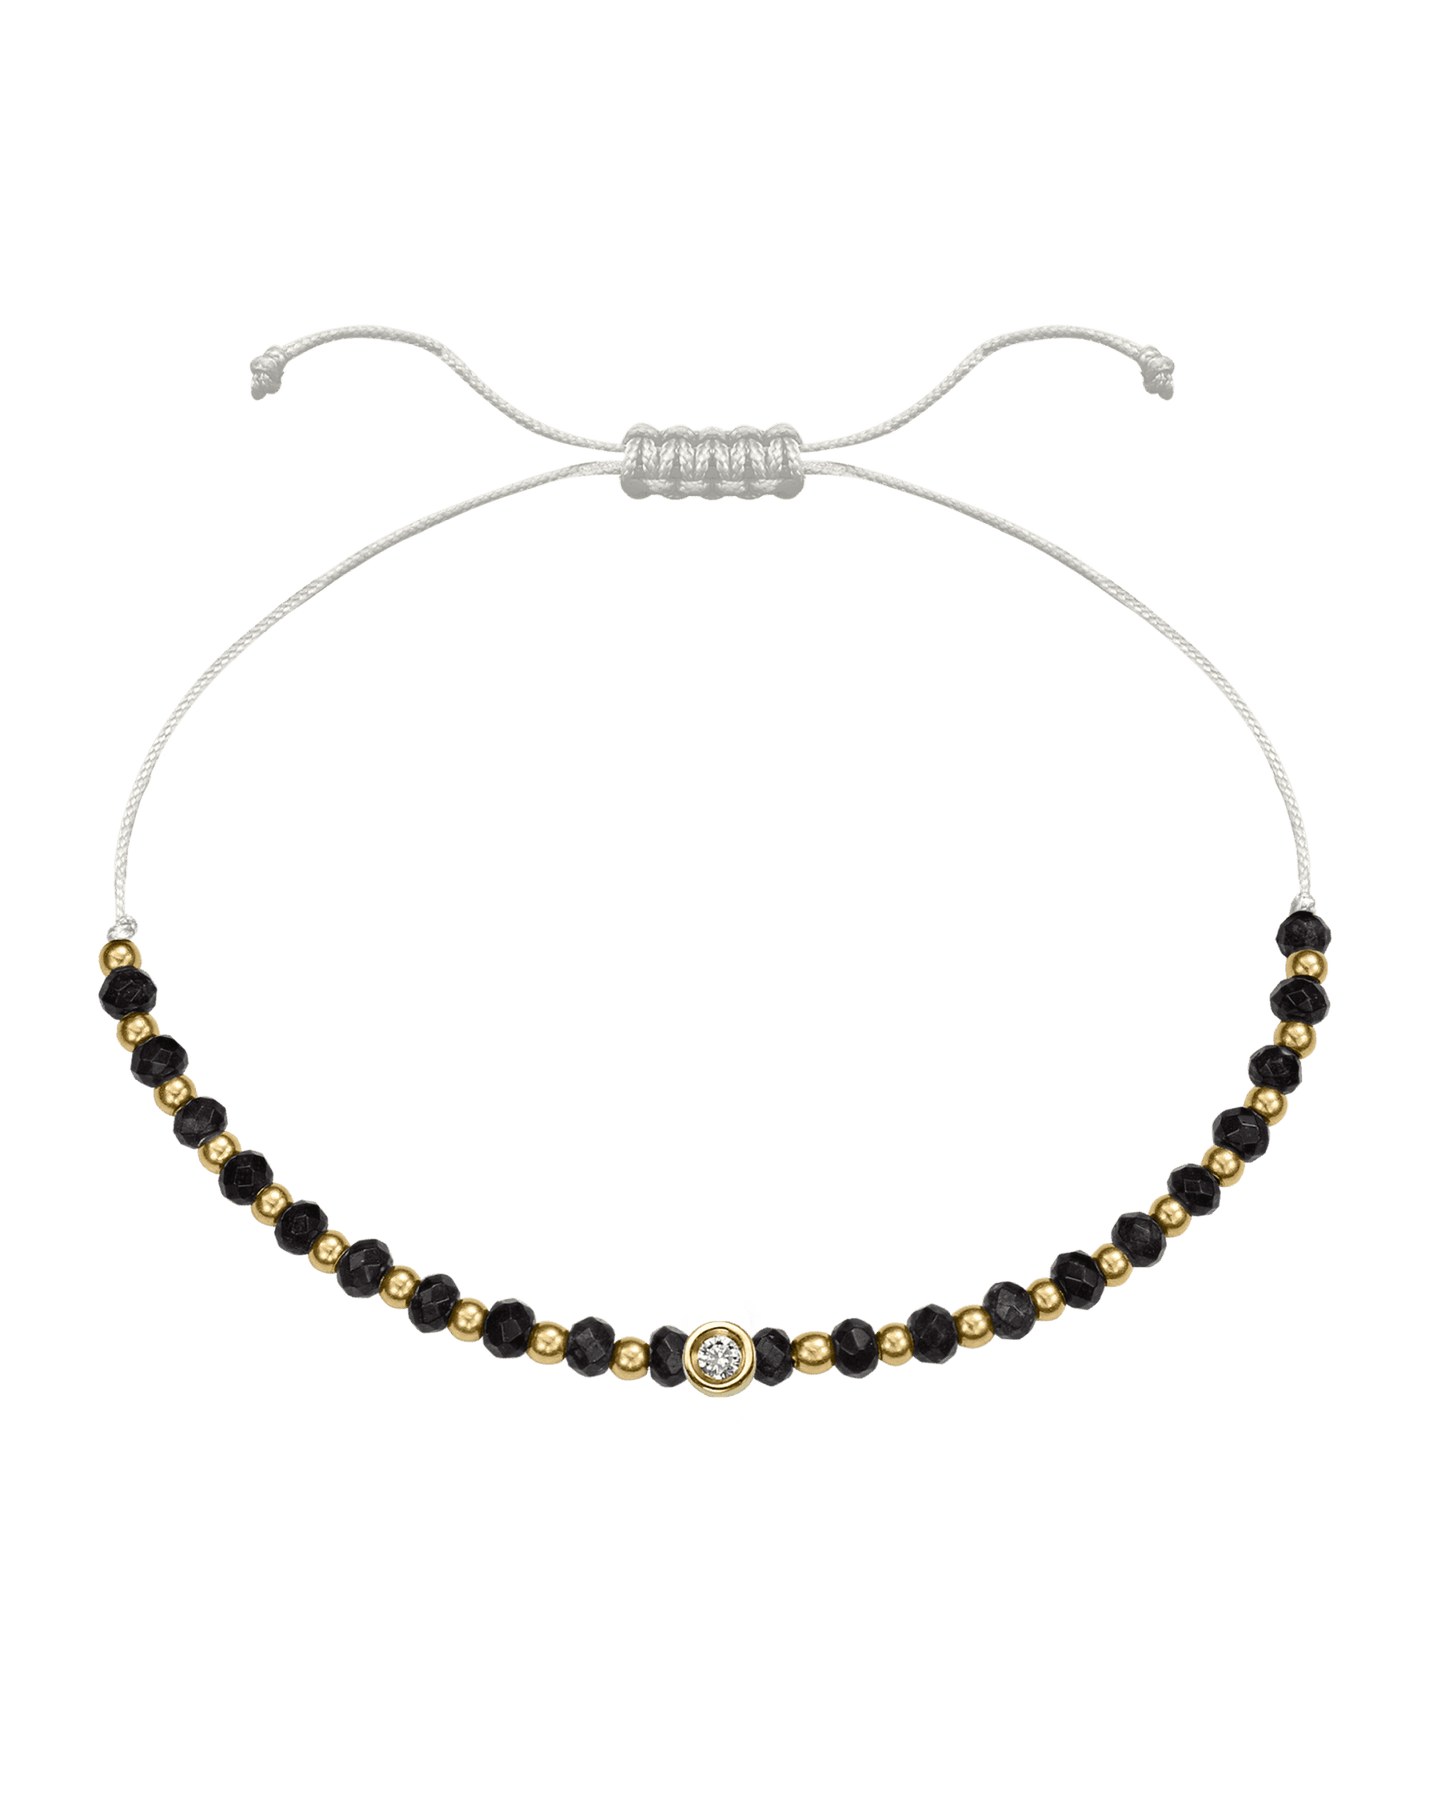 Black Onyx Gemstone String of Love Bracelet for Protection - 14K Yellow Gold Bracelets 14K Solid Gold Pearl Small: 0.03ct 